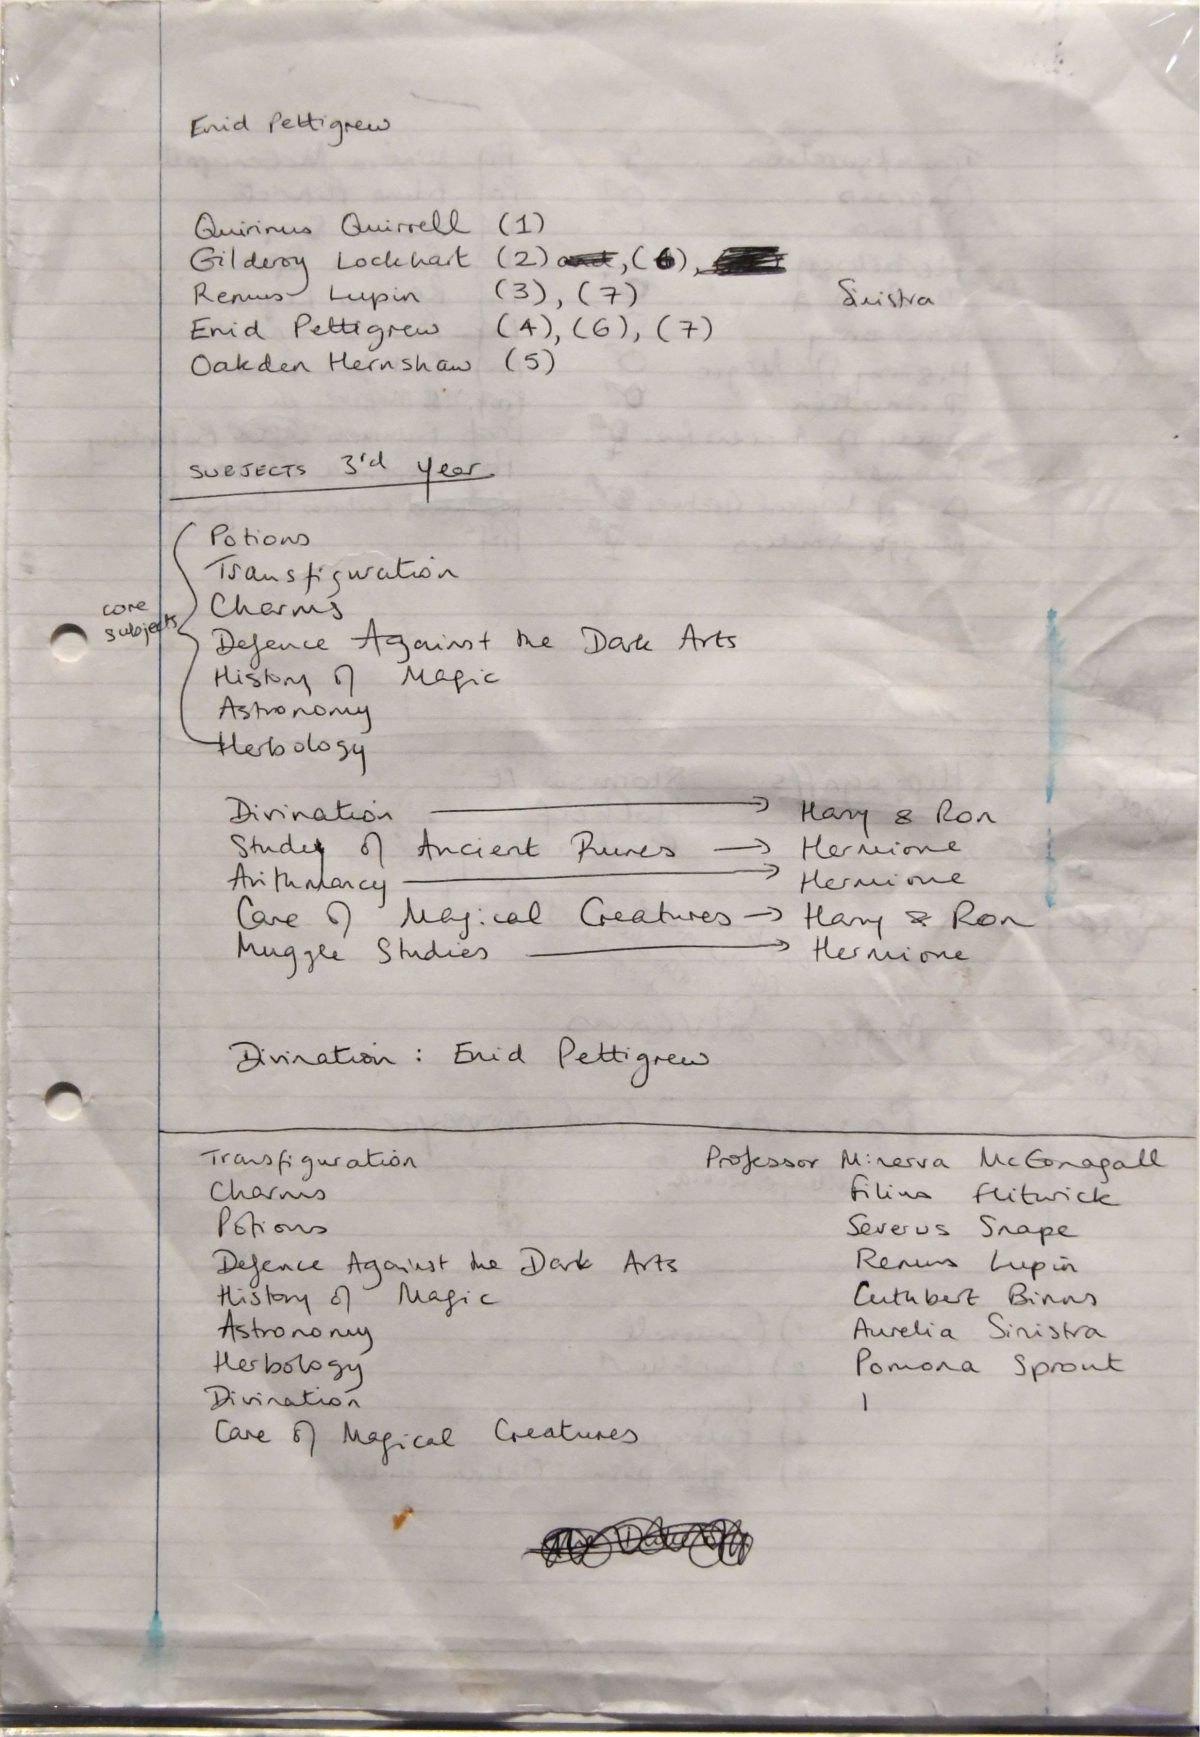 J.K. Rowling's notes of list of Hogwarts' Subjects and Teachers